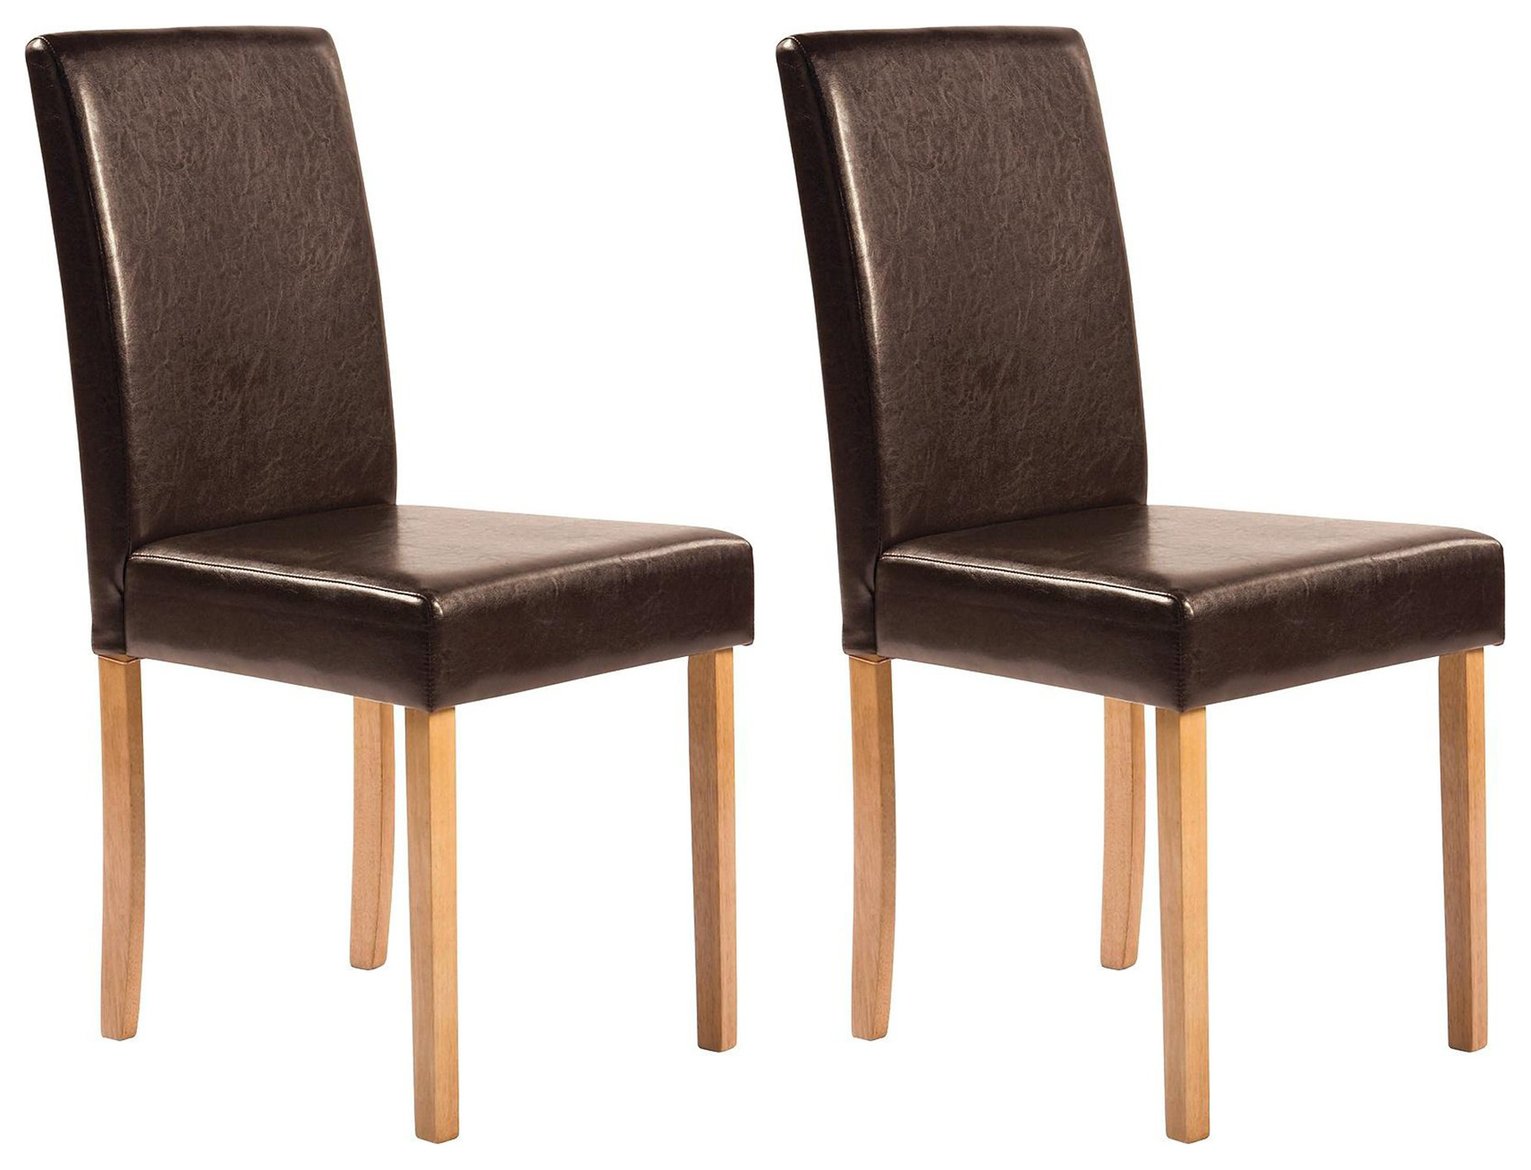 Argos Home Pair of Leather Effect Mid Back Chairs - Choc